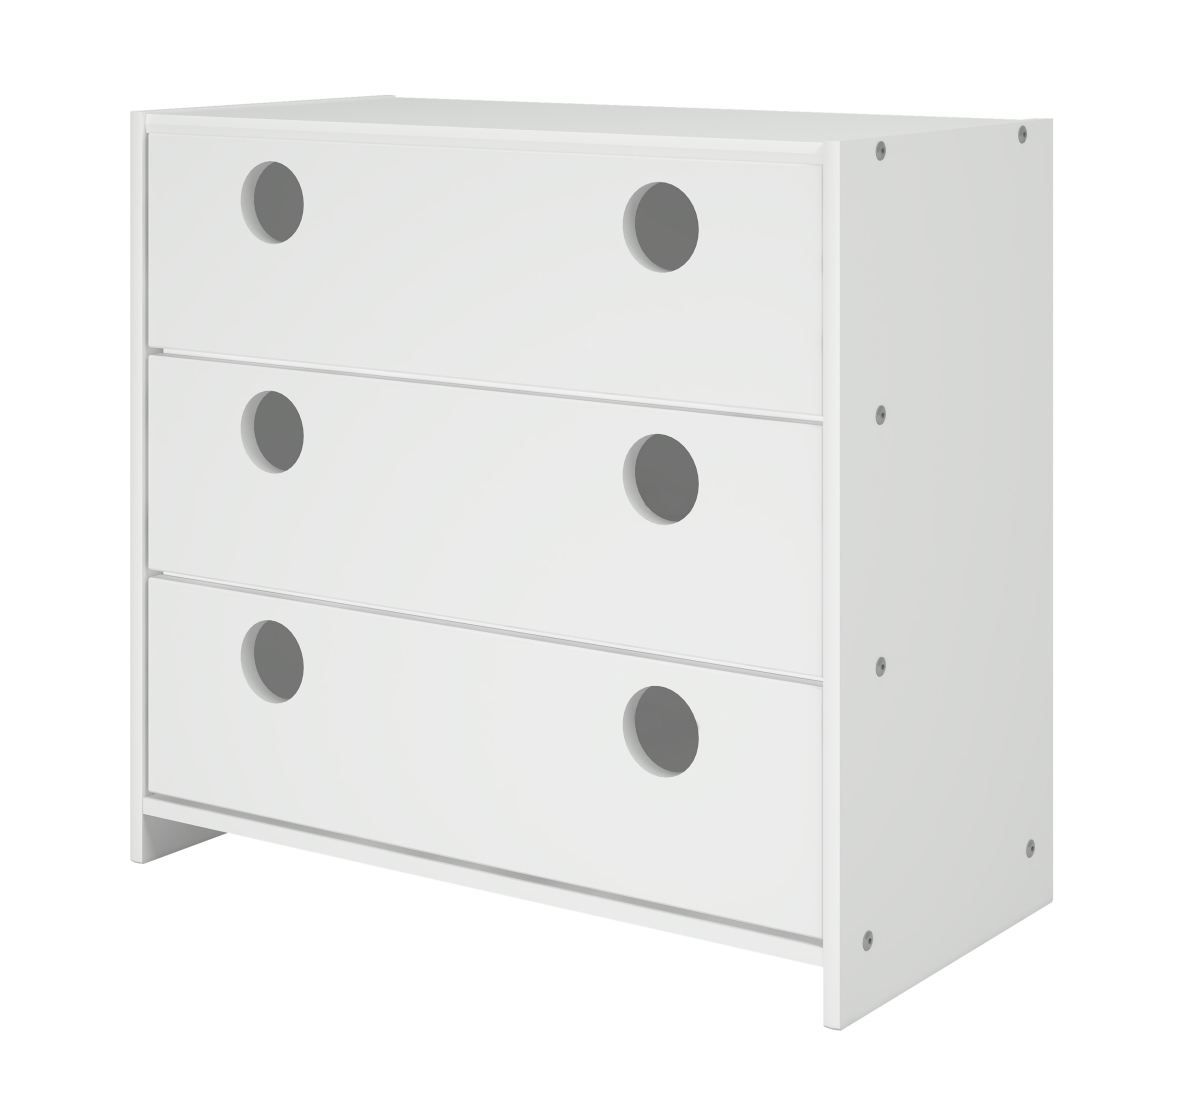 Pd-780b-tw 3 Drawer Chest In White